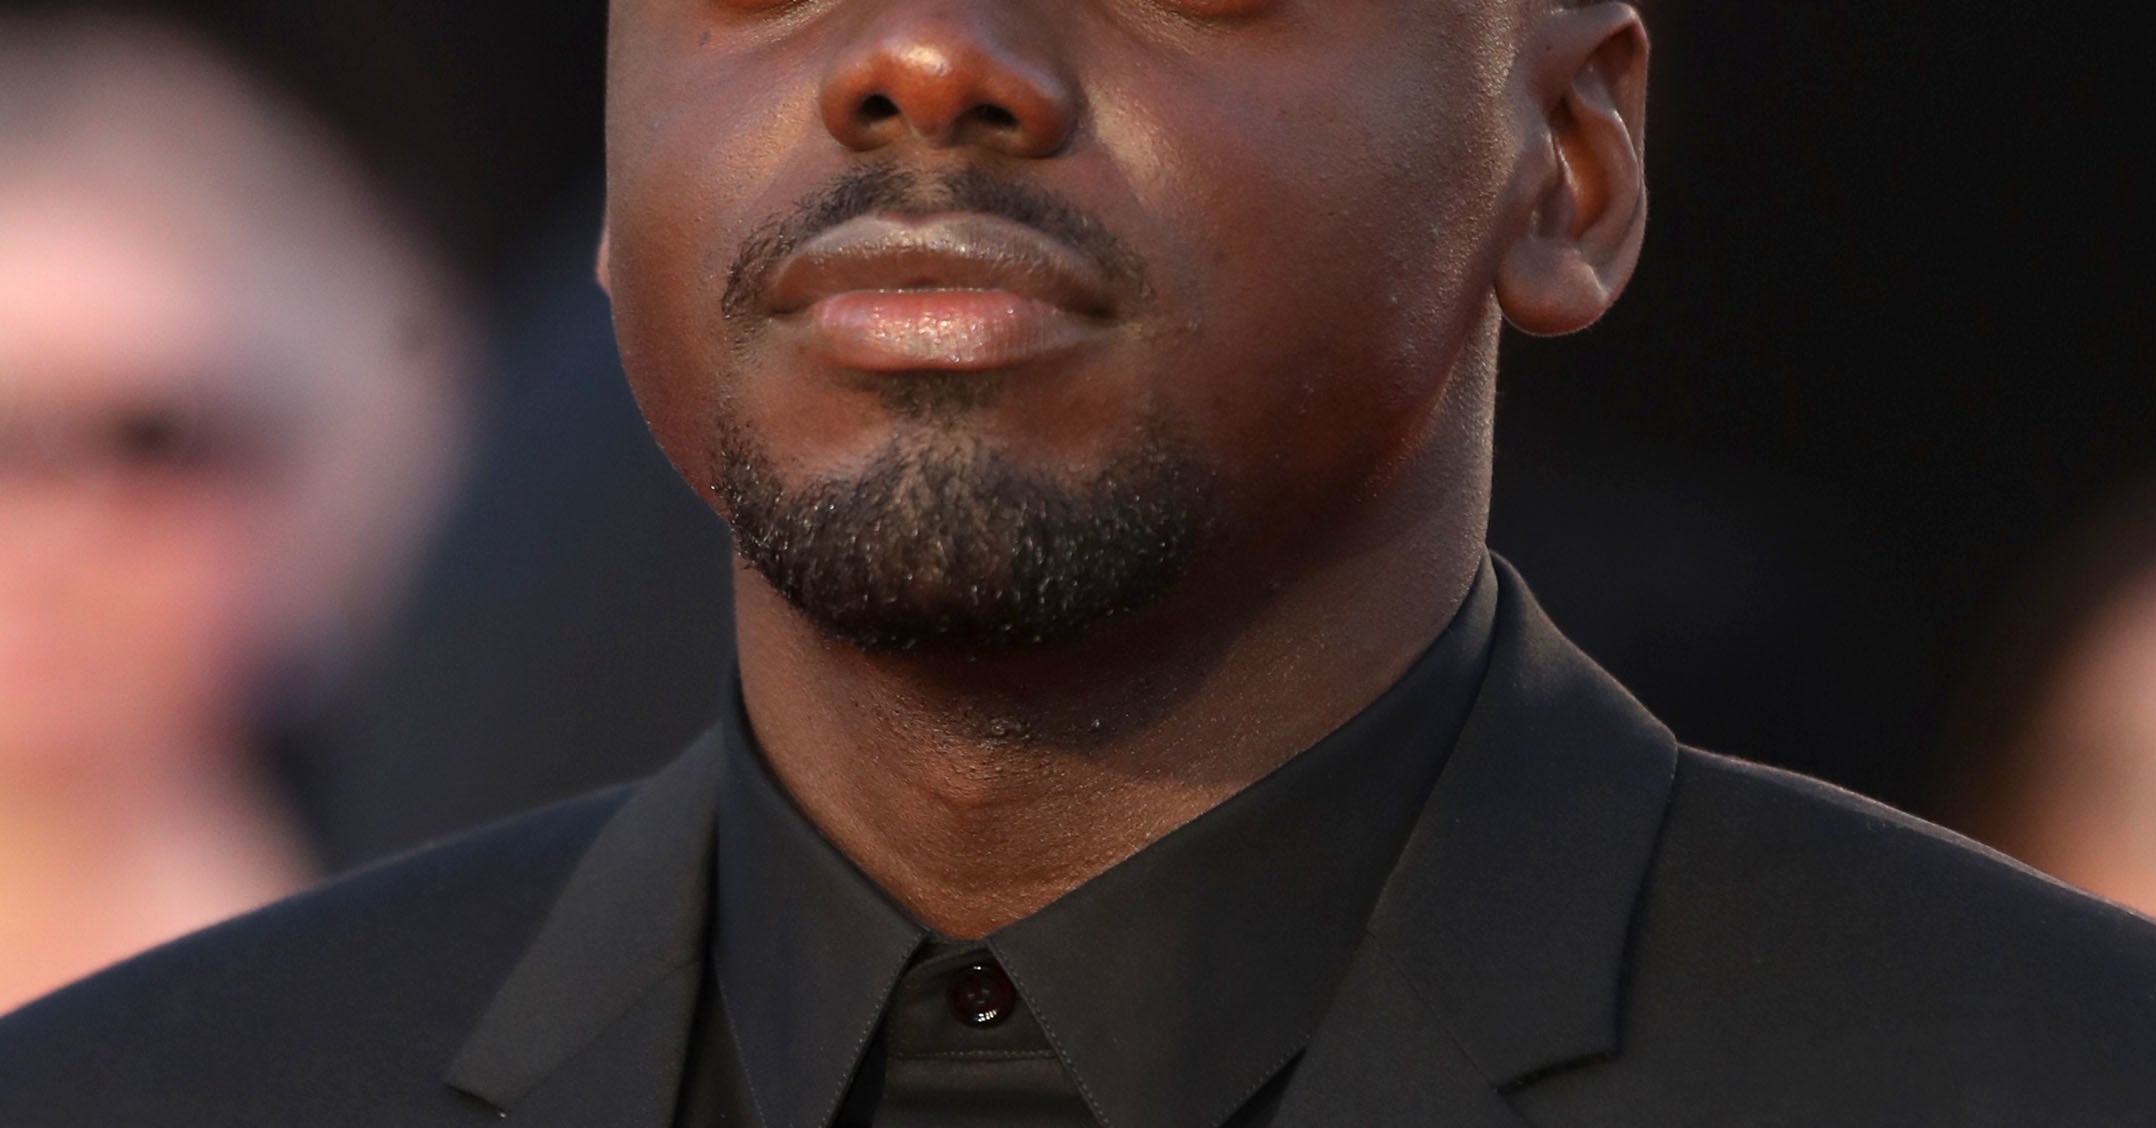 Daniel Kaluuya On White Reporters Asking How To Fix Racism